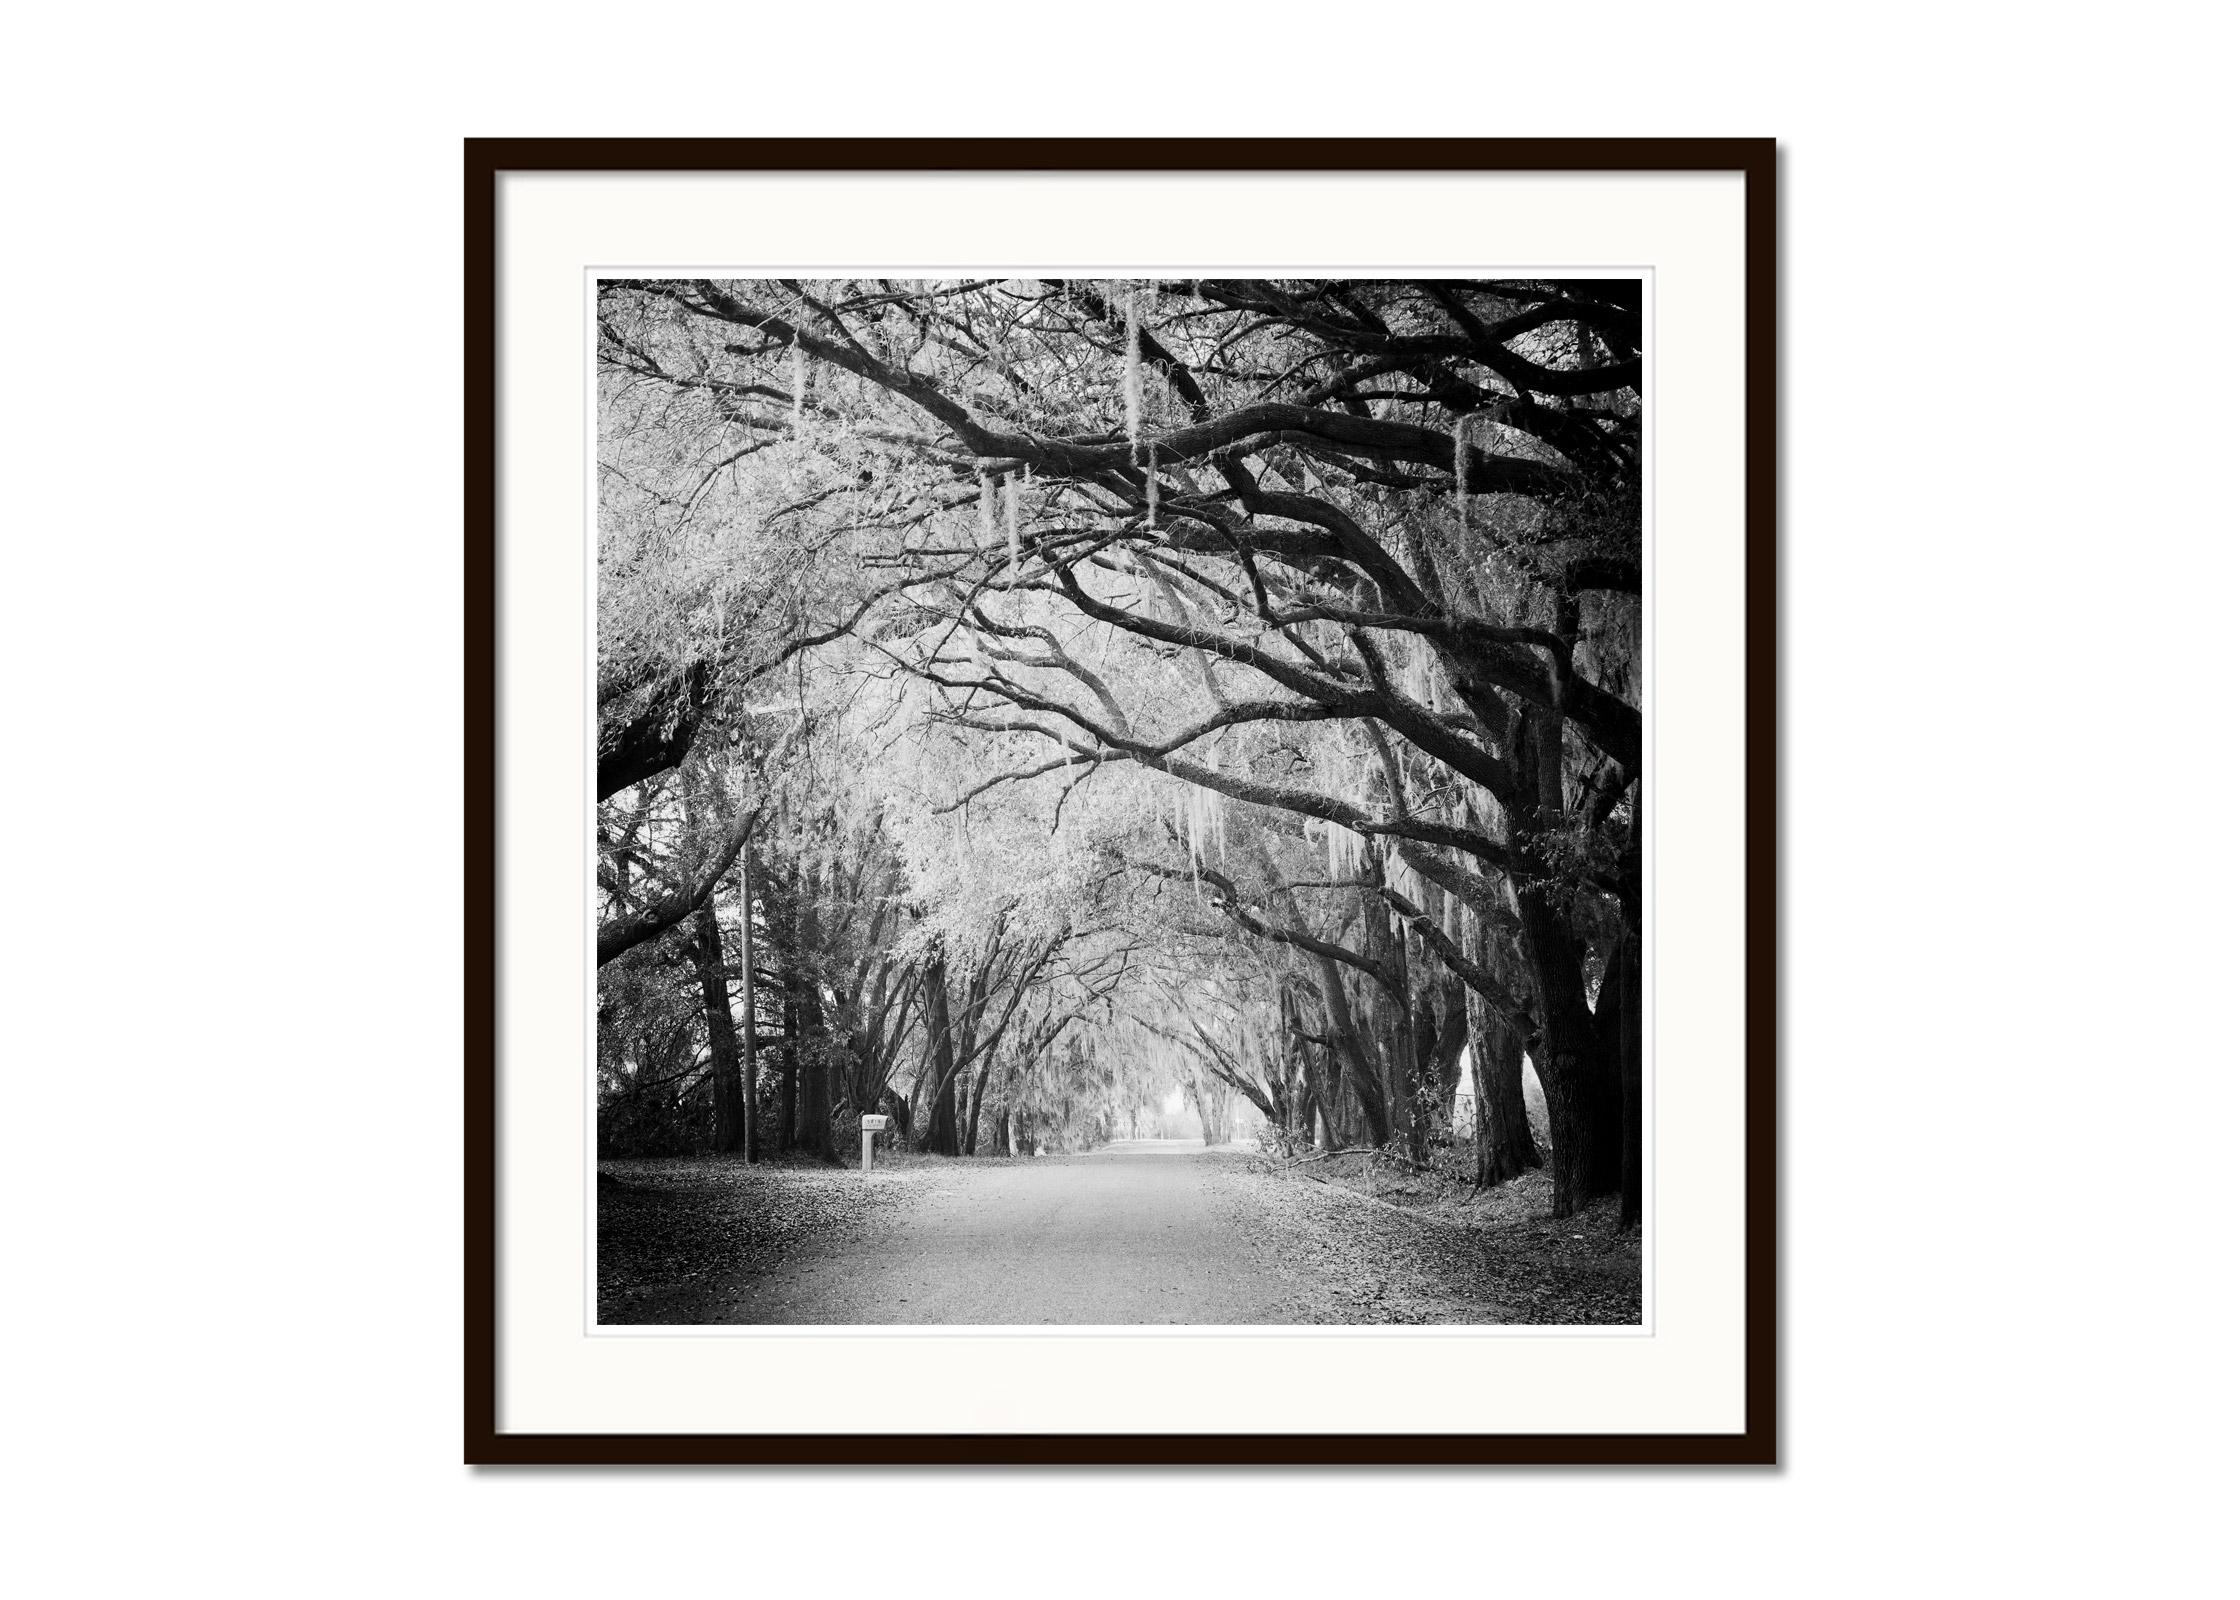 Black and white fine art landscape photography print. Archival pigment ink print, edition of 9. Signed, titled, dated and numbered by artist. Certificate of authenticity included. Printed with 4cm white border.
International award winner